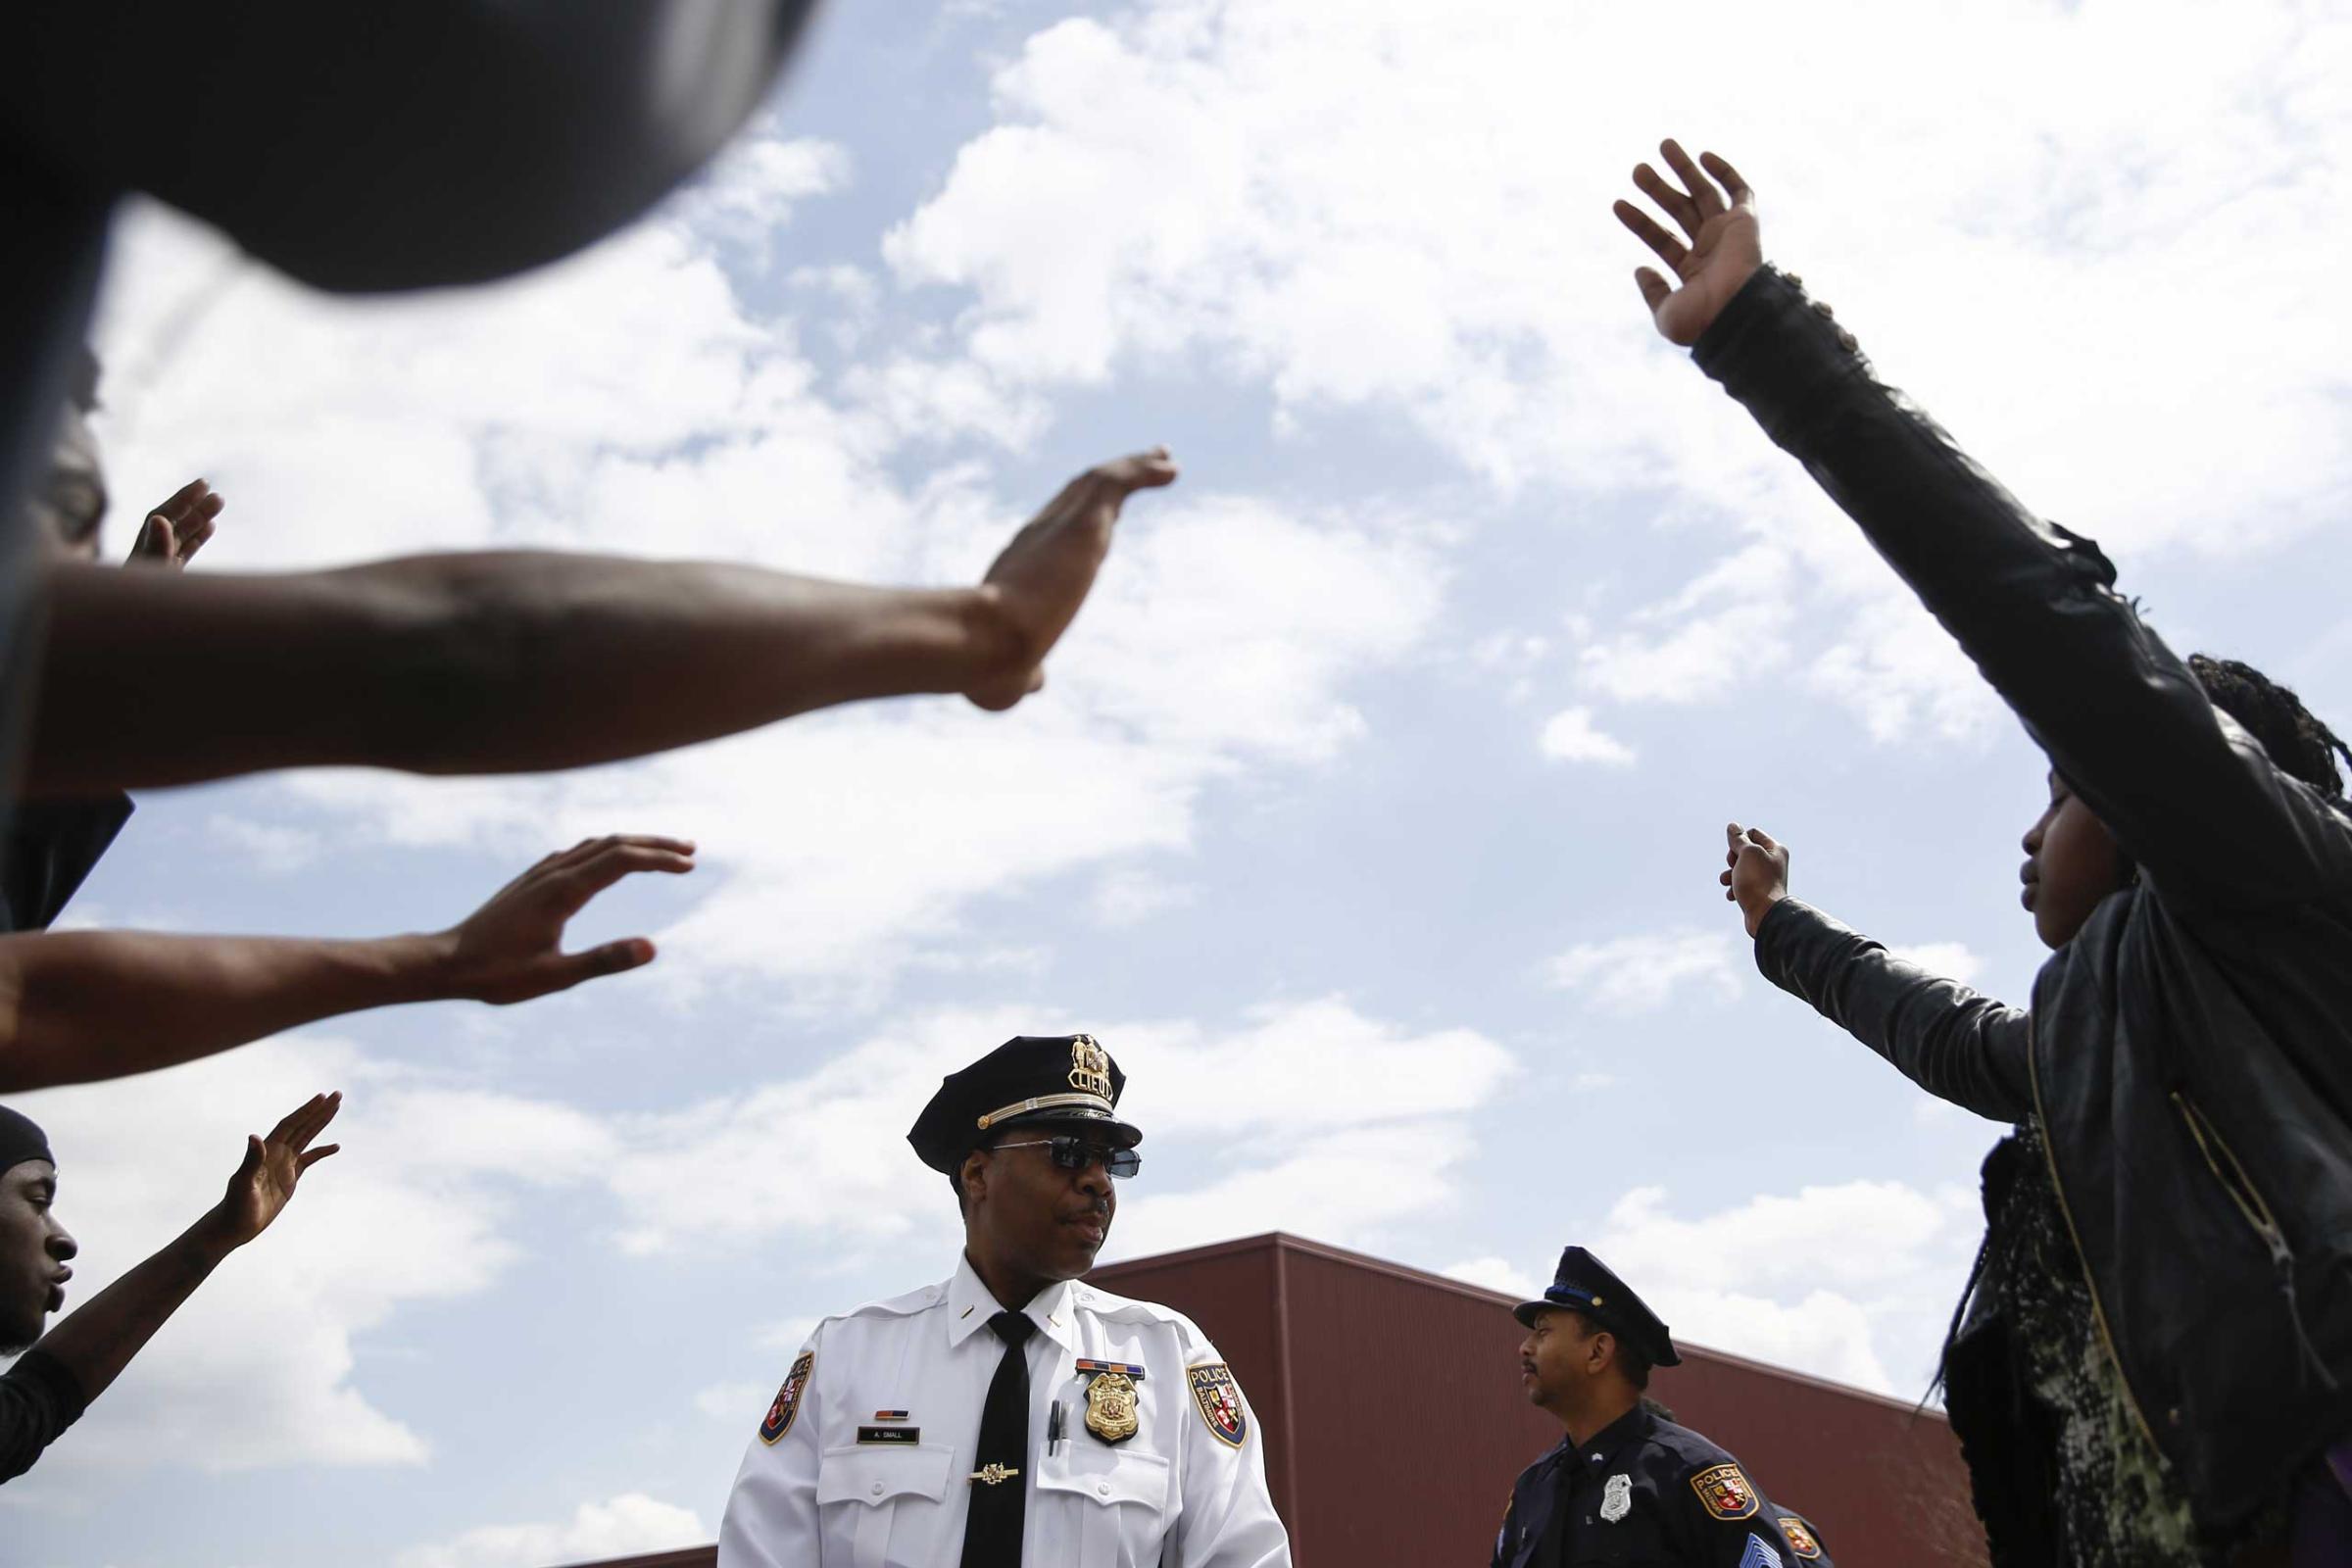 Protesters surround a police officer near Mondawmin Mall in Baltimore on April 27, 2015.